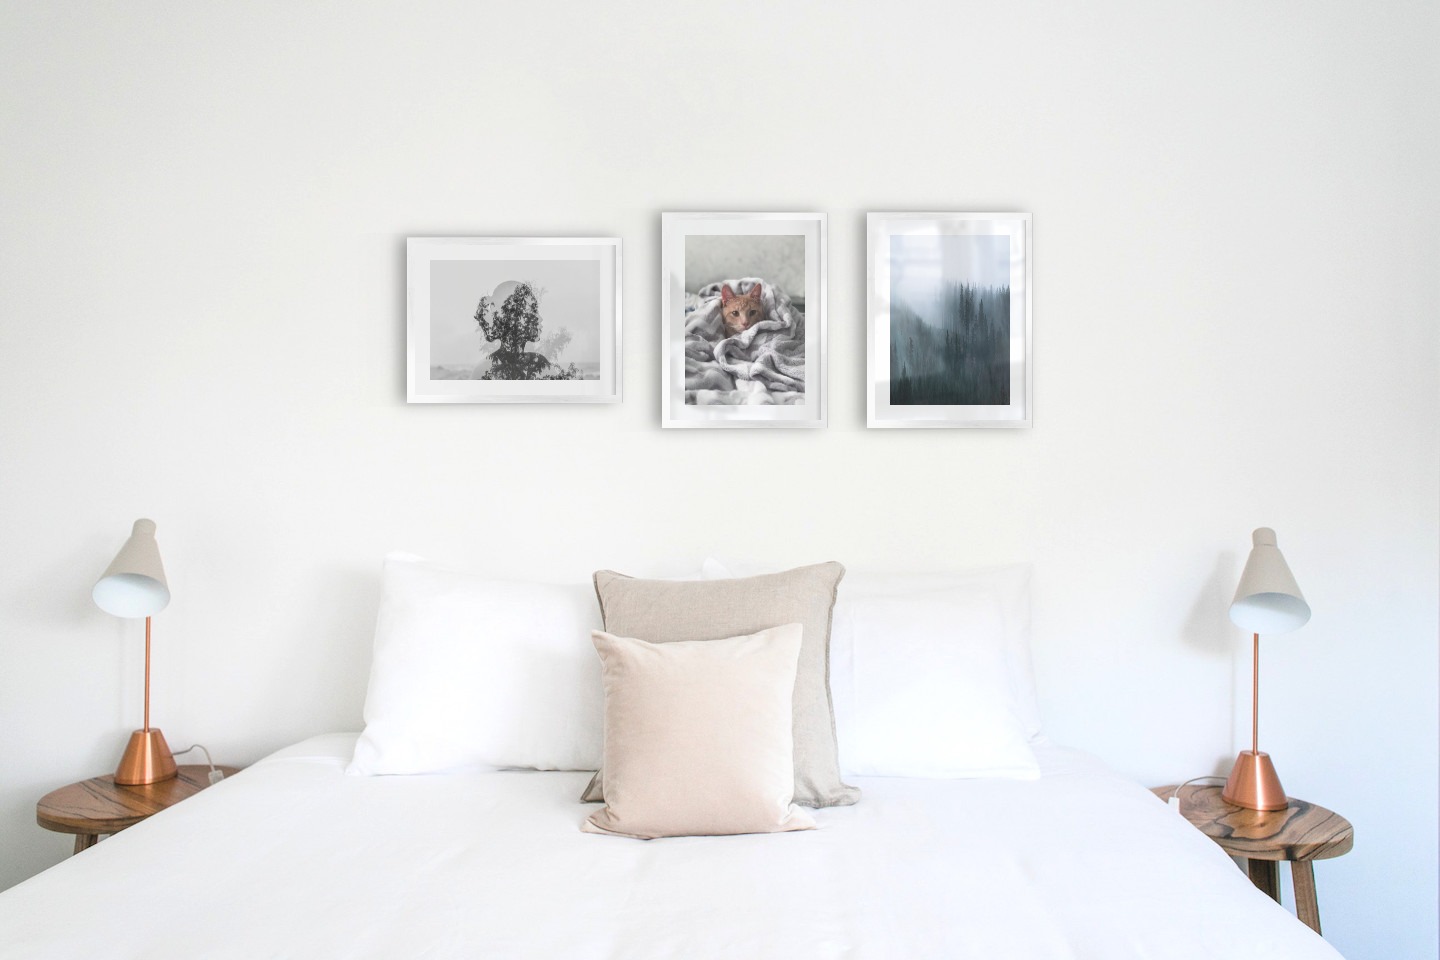 Gallery wall with picture frames in silver in sizes 30x40 with prints "Trees and silhouette", "Cat in felt" and "Foggy forest"